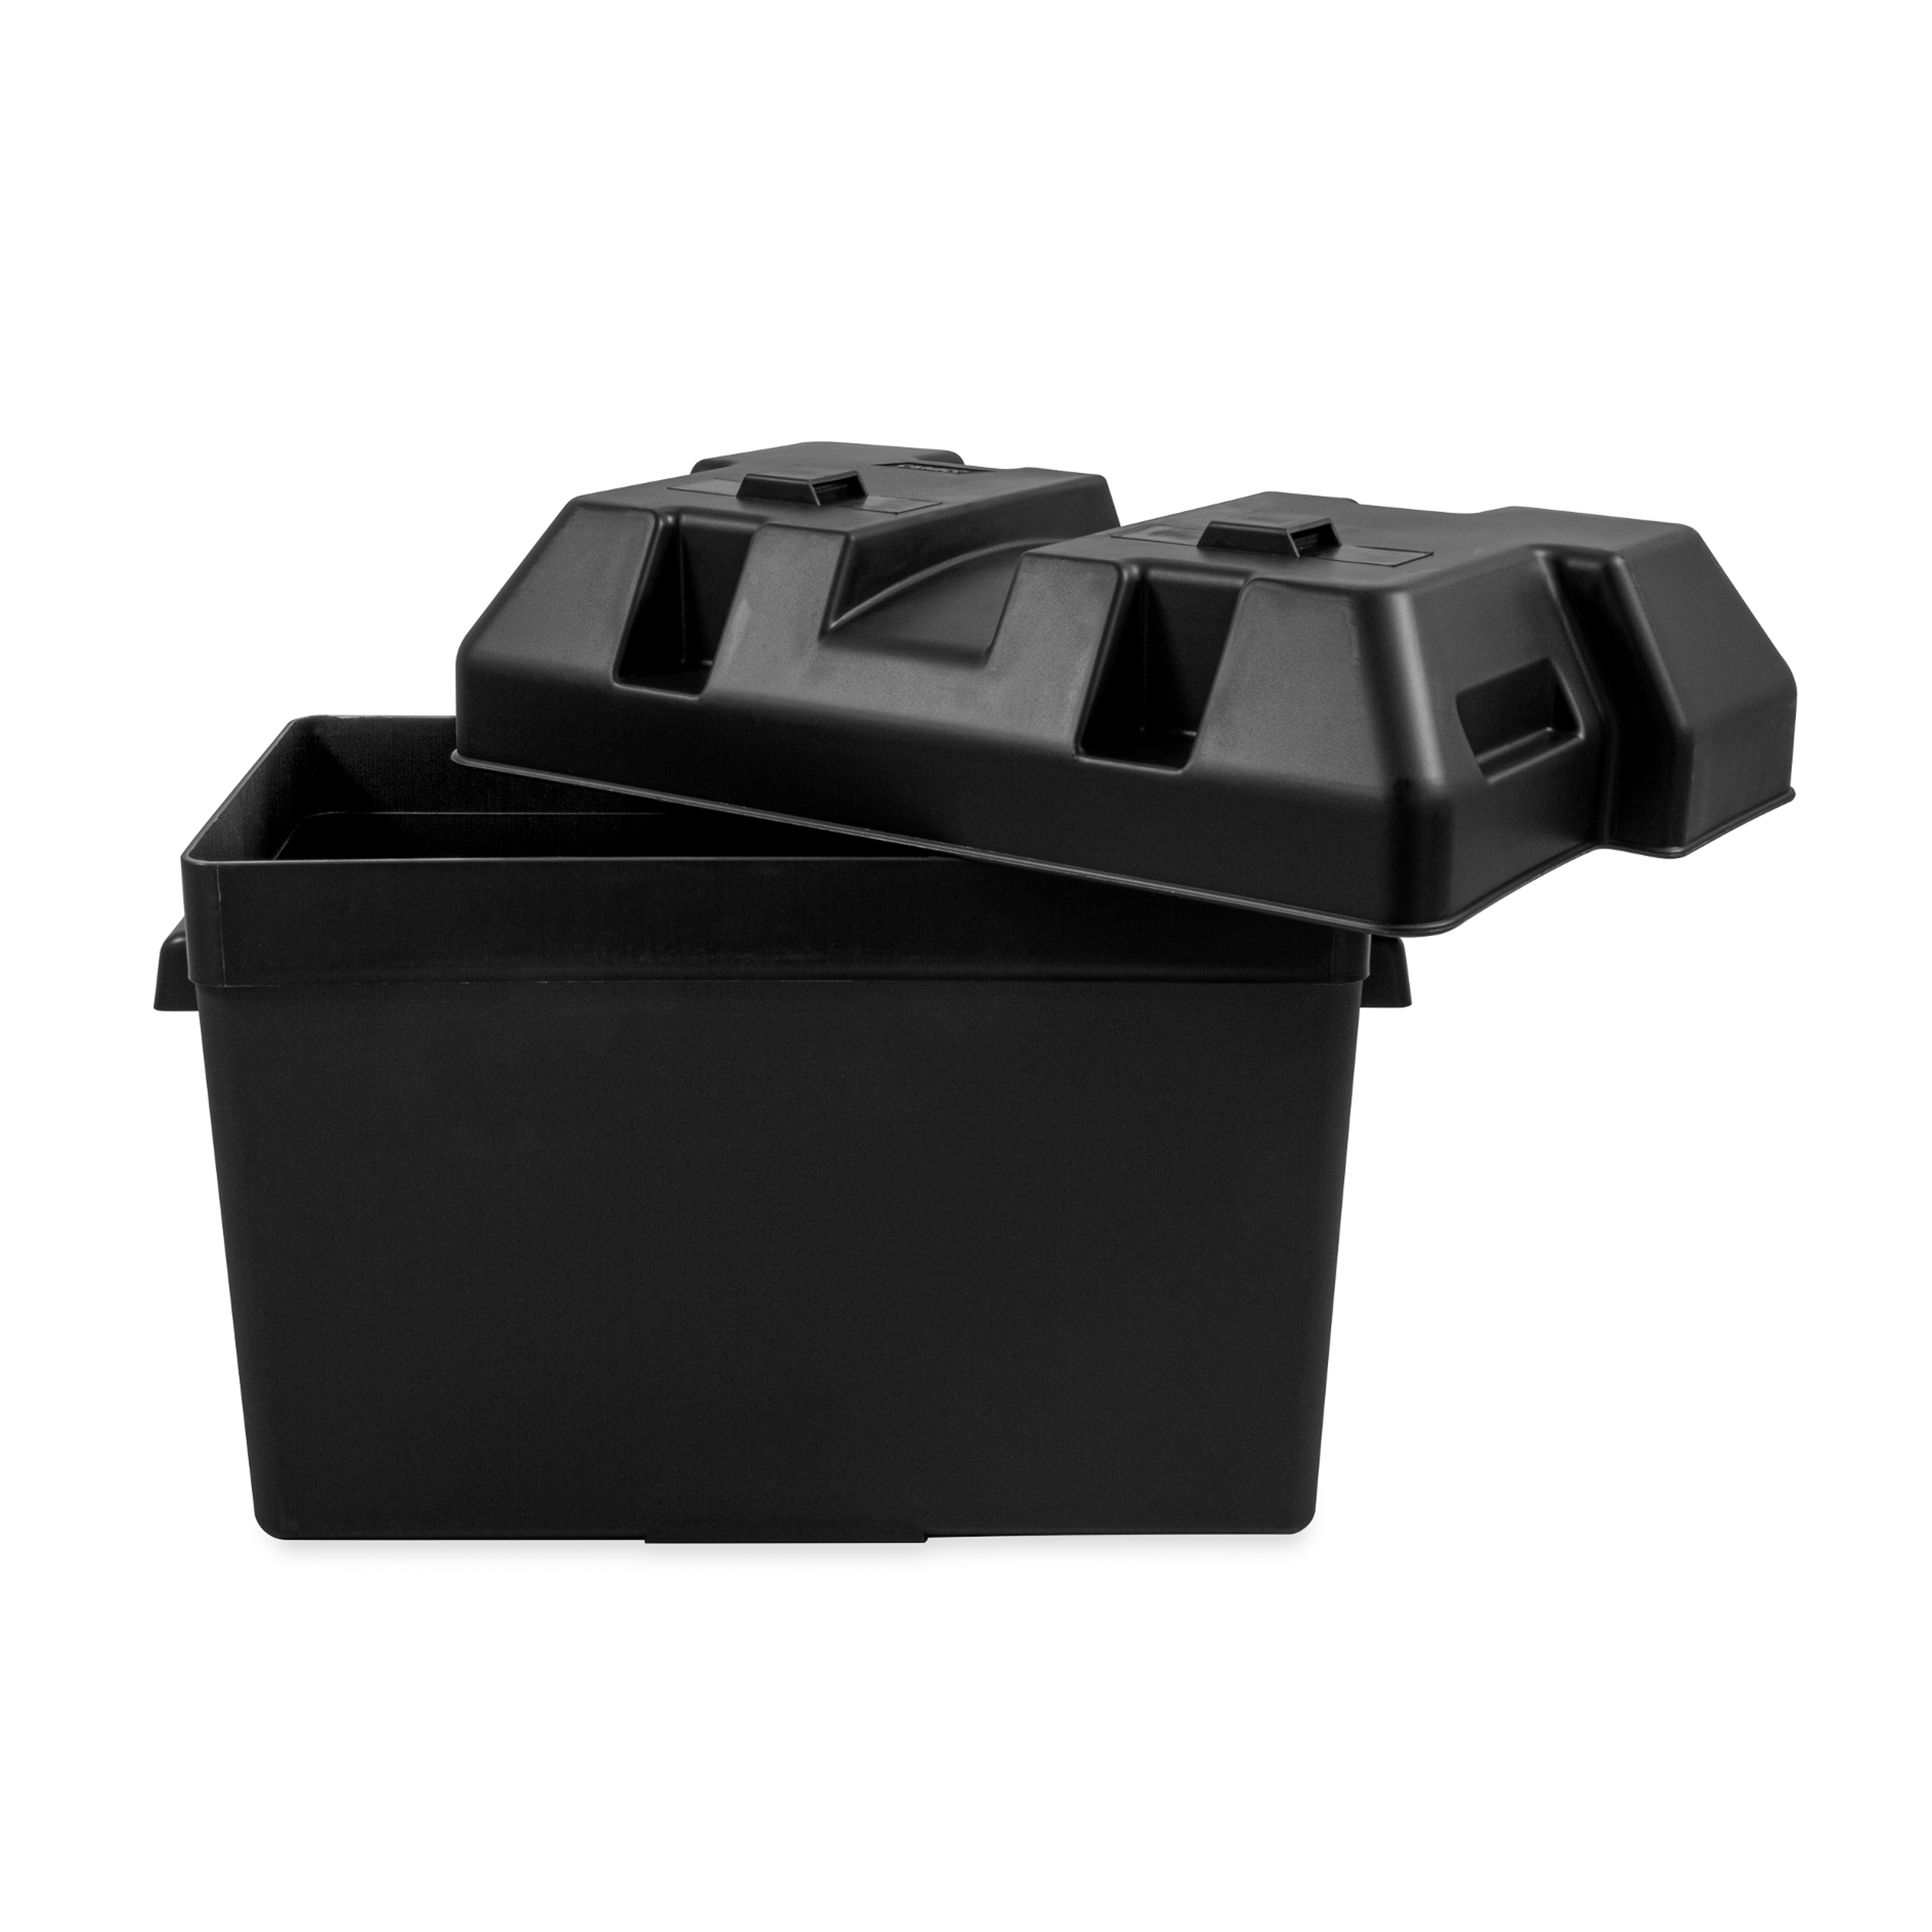 Camco RV Large Battery Box - Inside Dimensions 7.25-inches x 13.25-inches x 8.63-inches (55372) - image 4 of 8